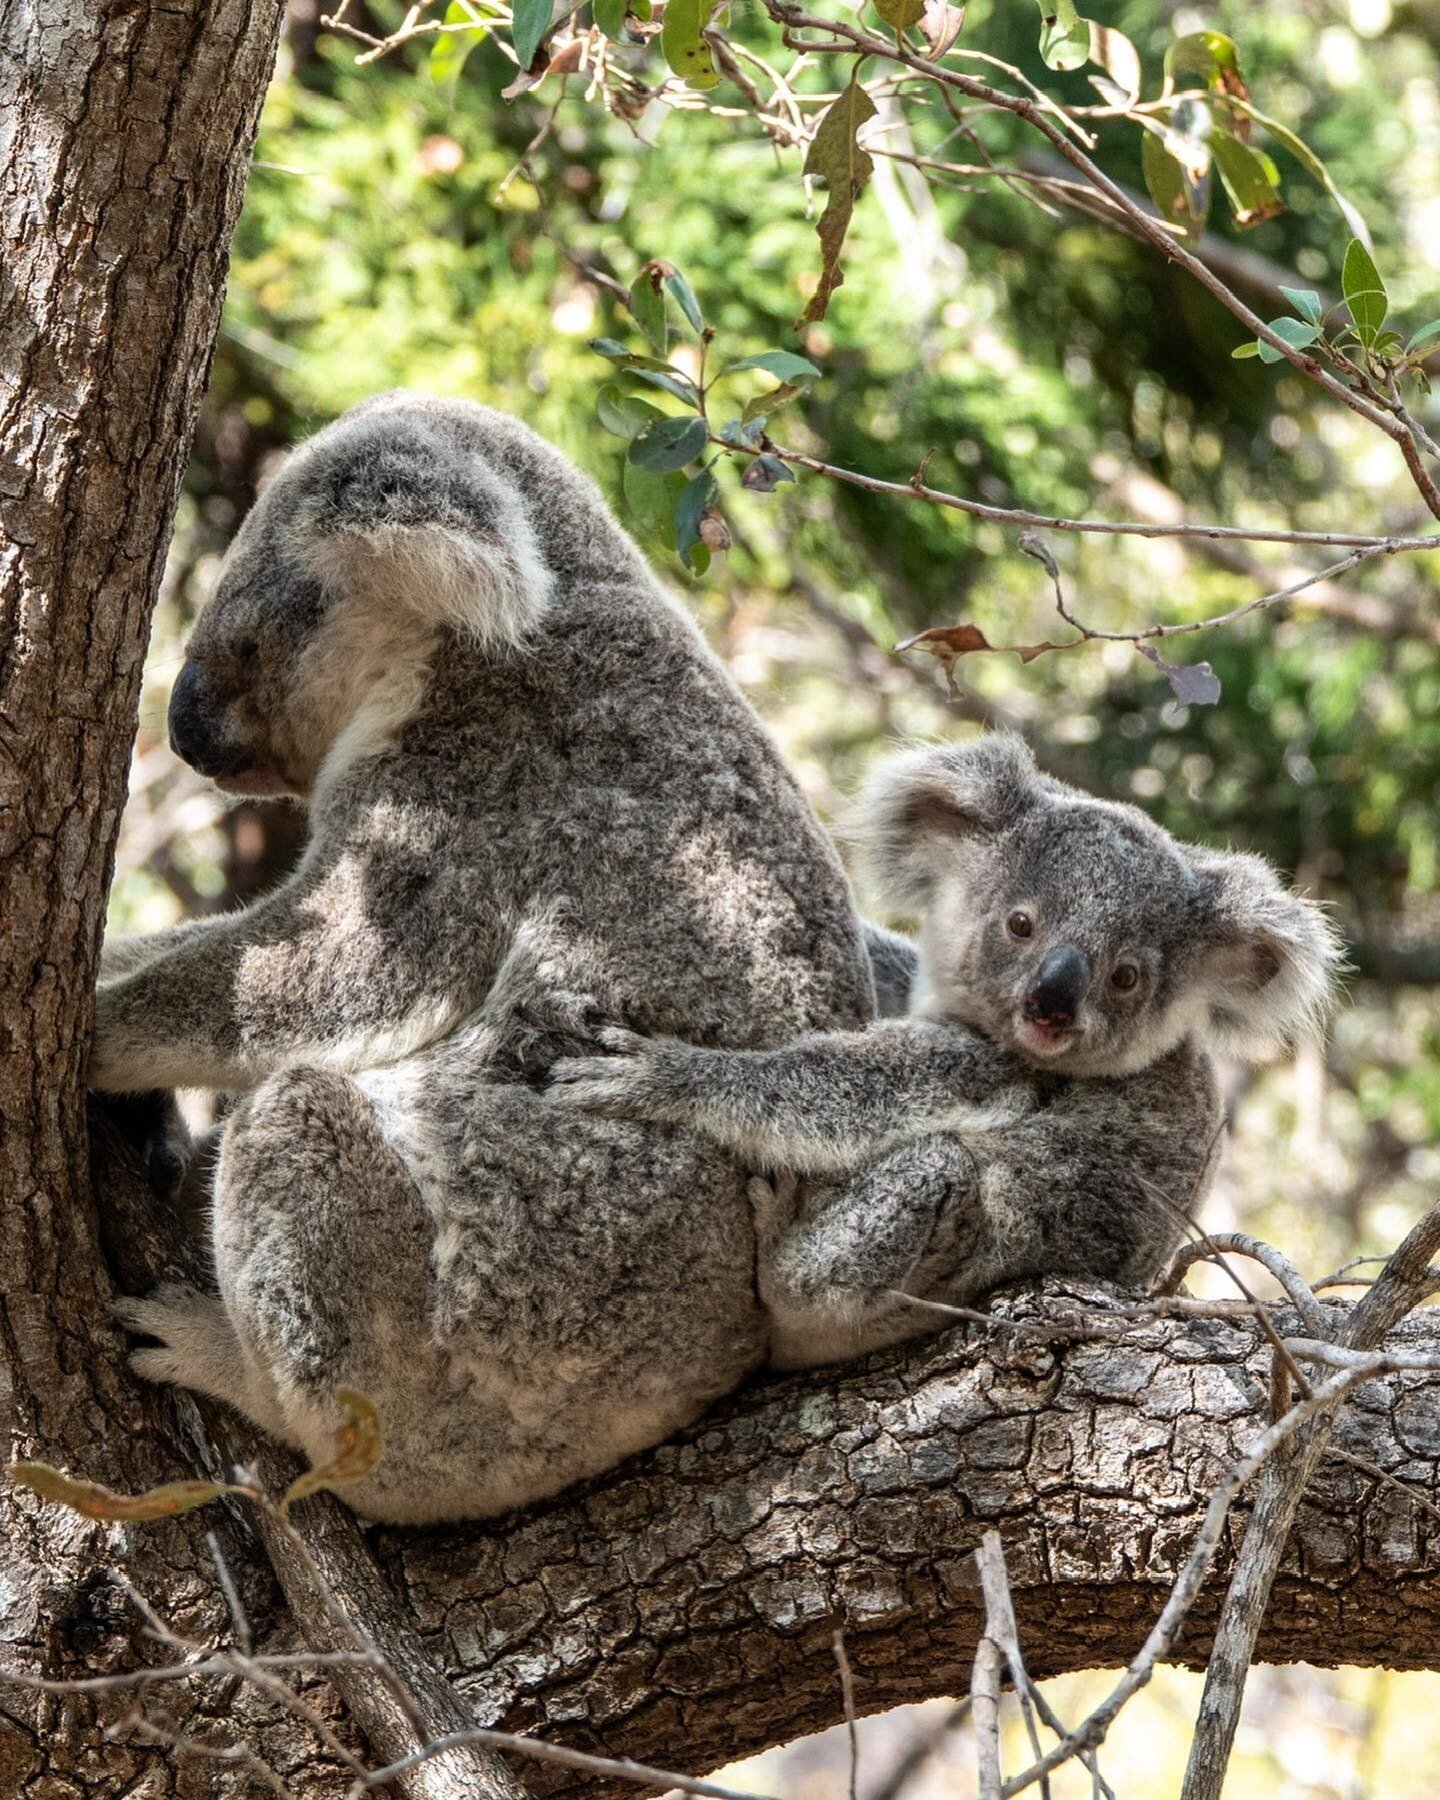 Meet our furry neighbours 🐨⁠
⁠
The Forts Walk is an essential part of a trip to Magnetic Island and is the best place to spot koalas in the wild. We suggest booking a Wildlife Tour at Selina if you want to get up close.⁠
⁠
For koala etiquette and to